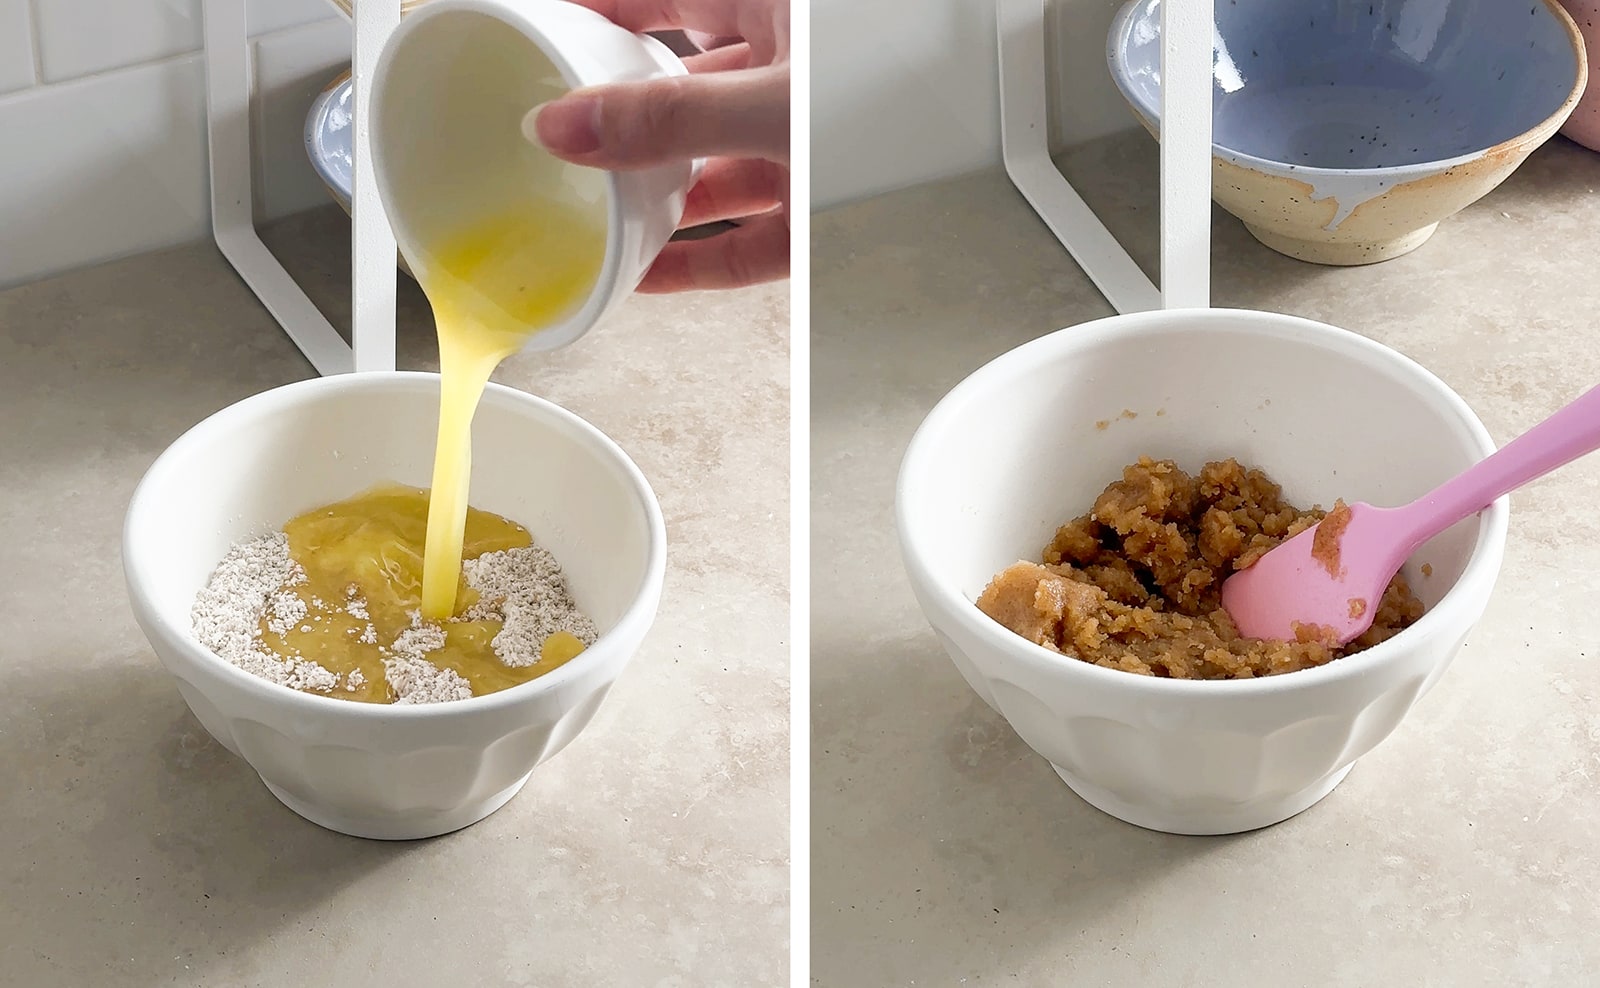 Left to right: pouring melted butter into bowl of flour and sugar, mixed crumble topping in a bowl.